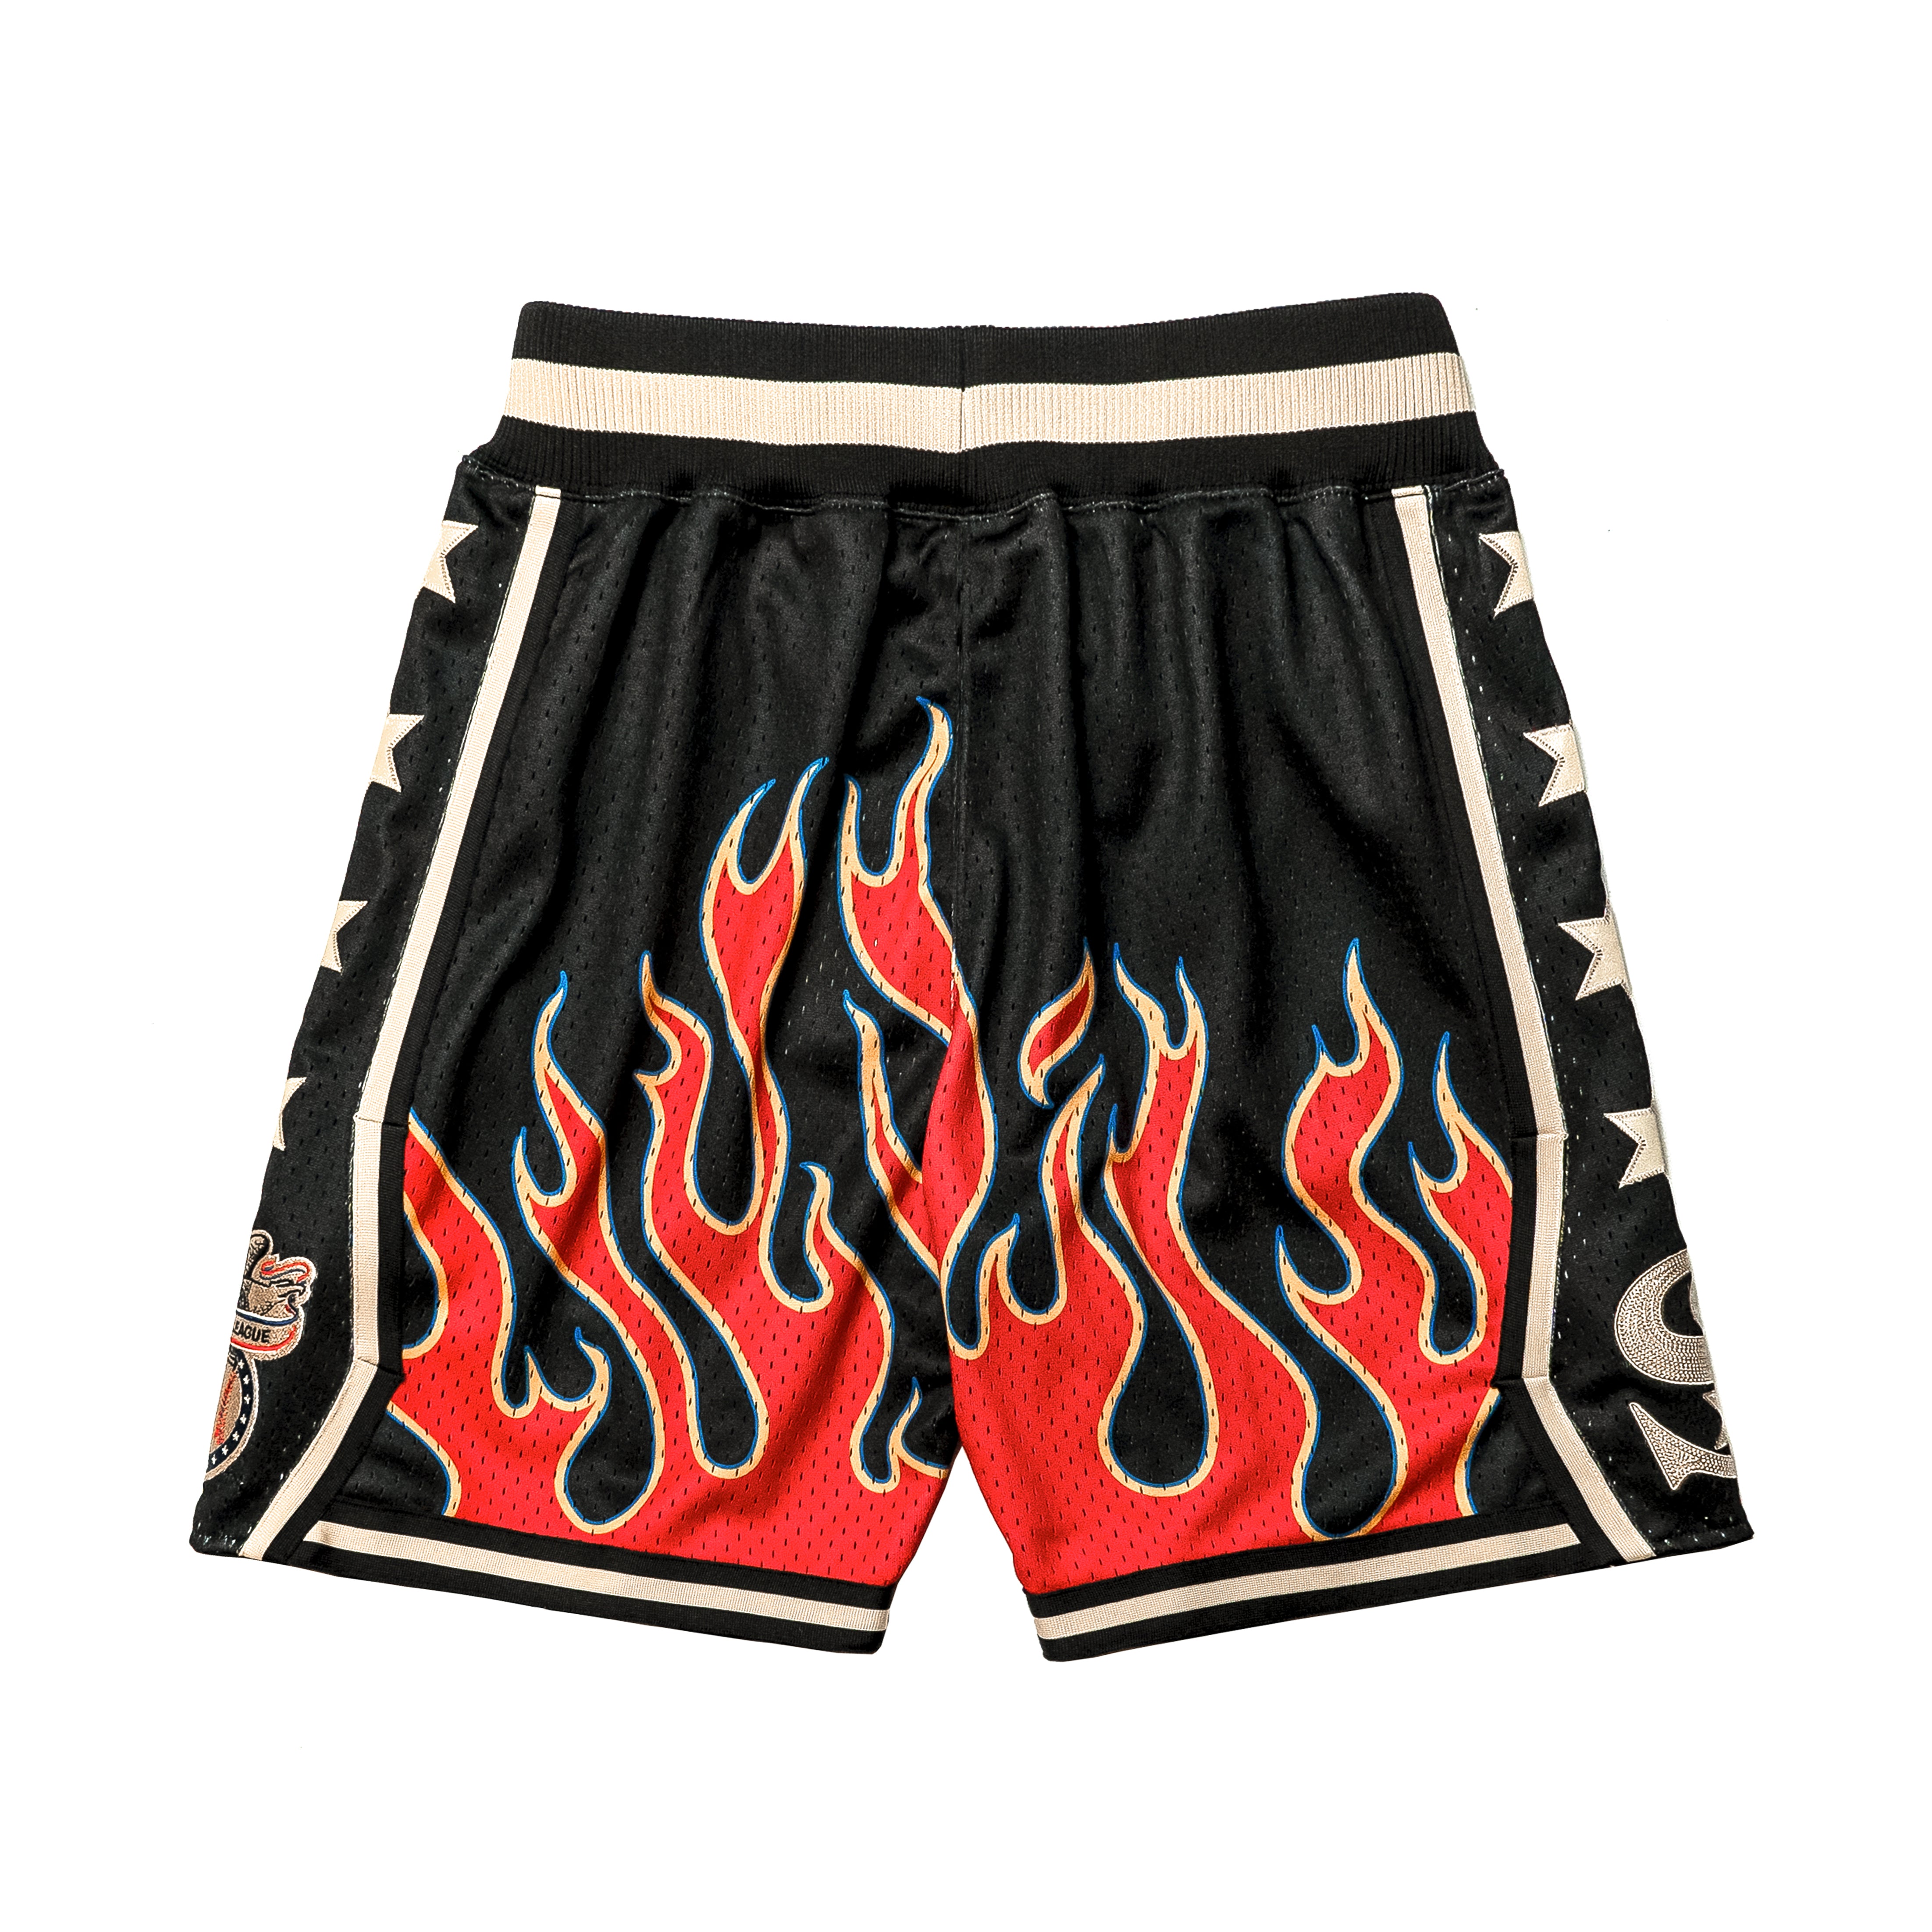 Chicago White Sox Edition Crosstown Series Shorts by JFG for Mitchell u0026 Ness